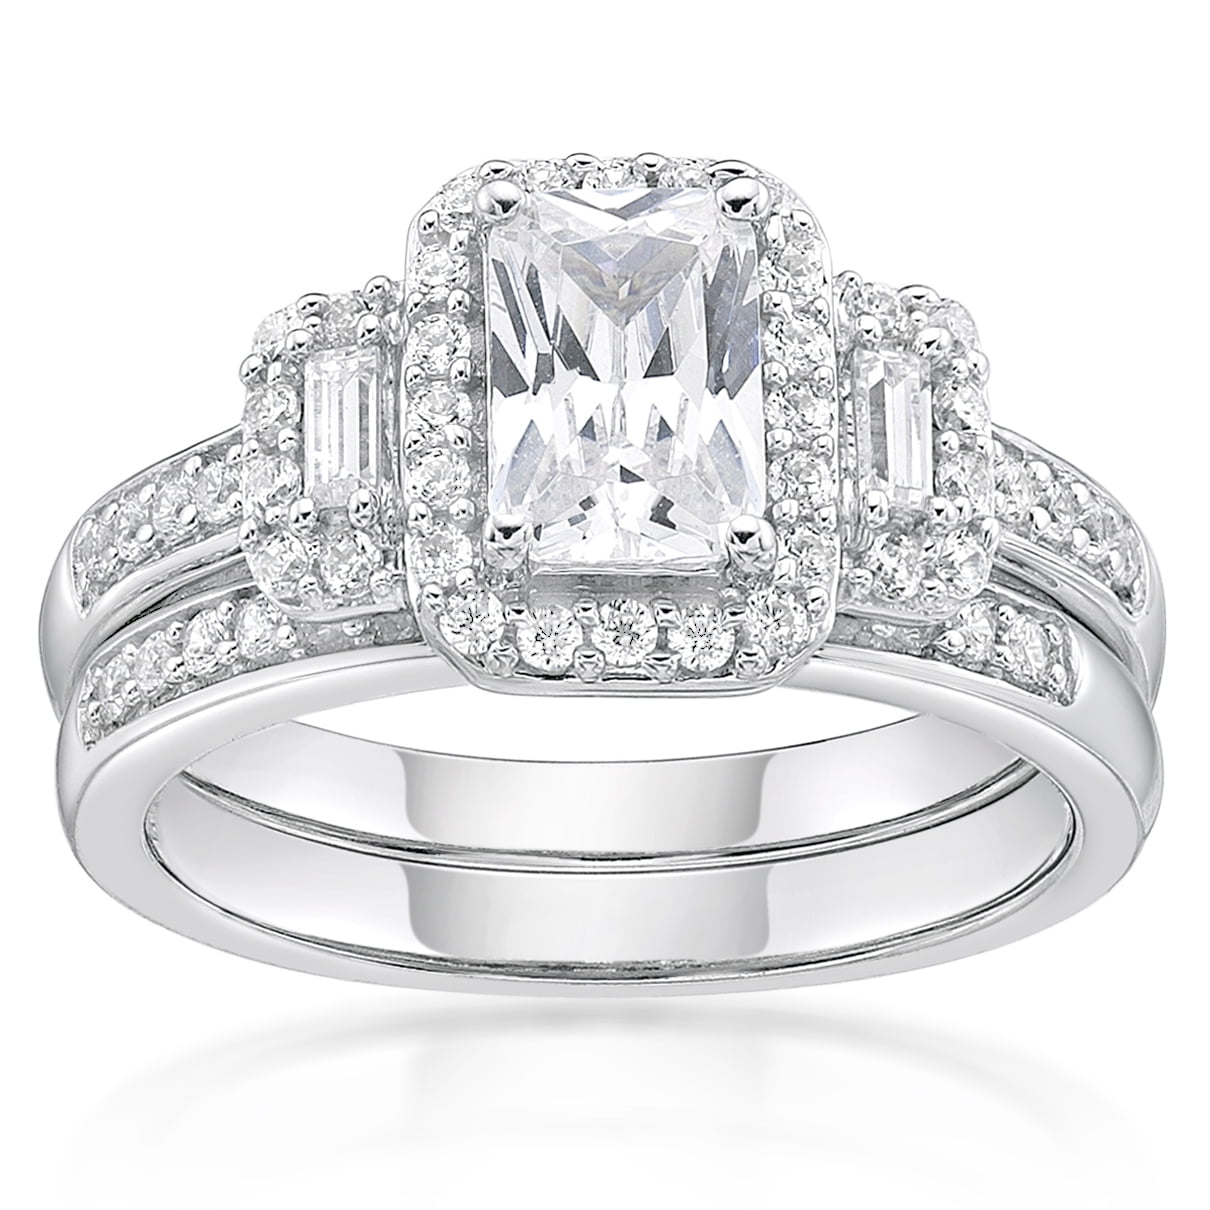 Details about   4.50 Ct Emerald Cut 3 Stone Diamond Wedding Engagement Ring 925 Sterling Silver 